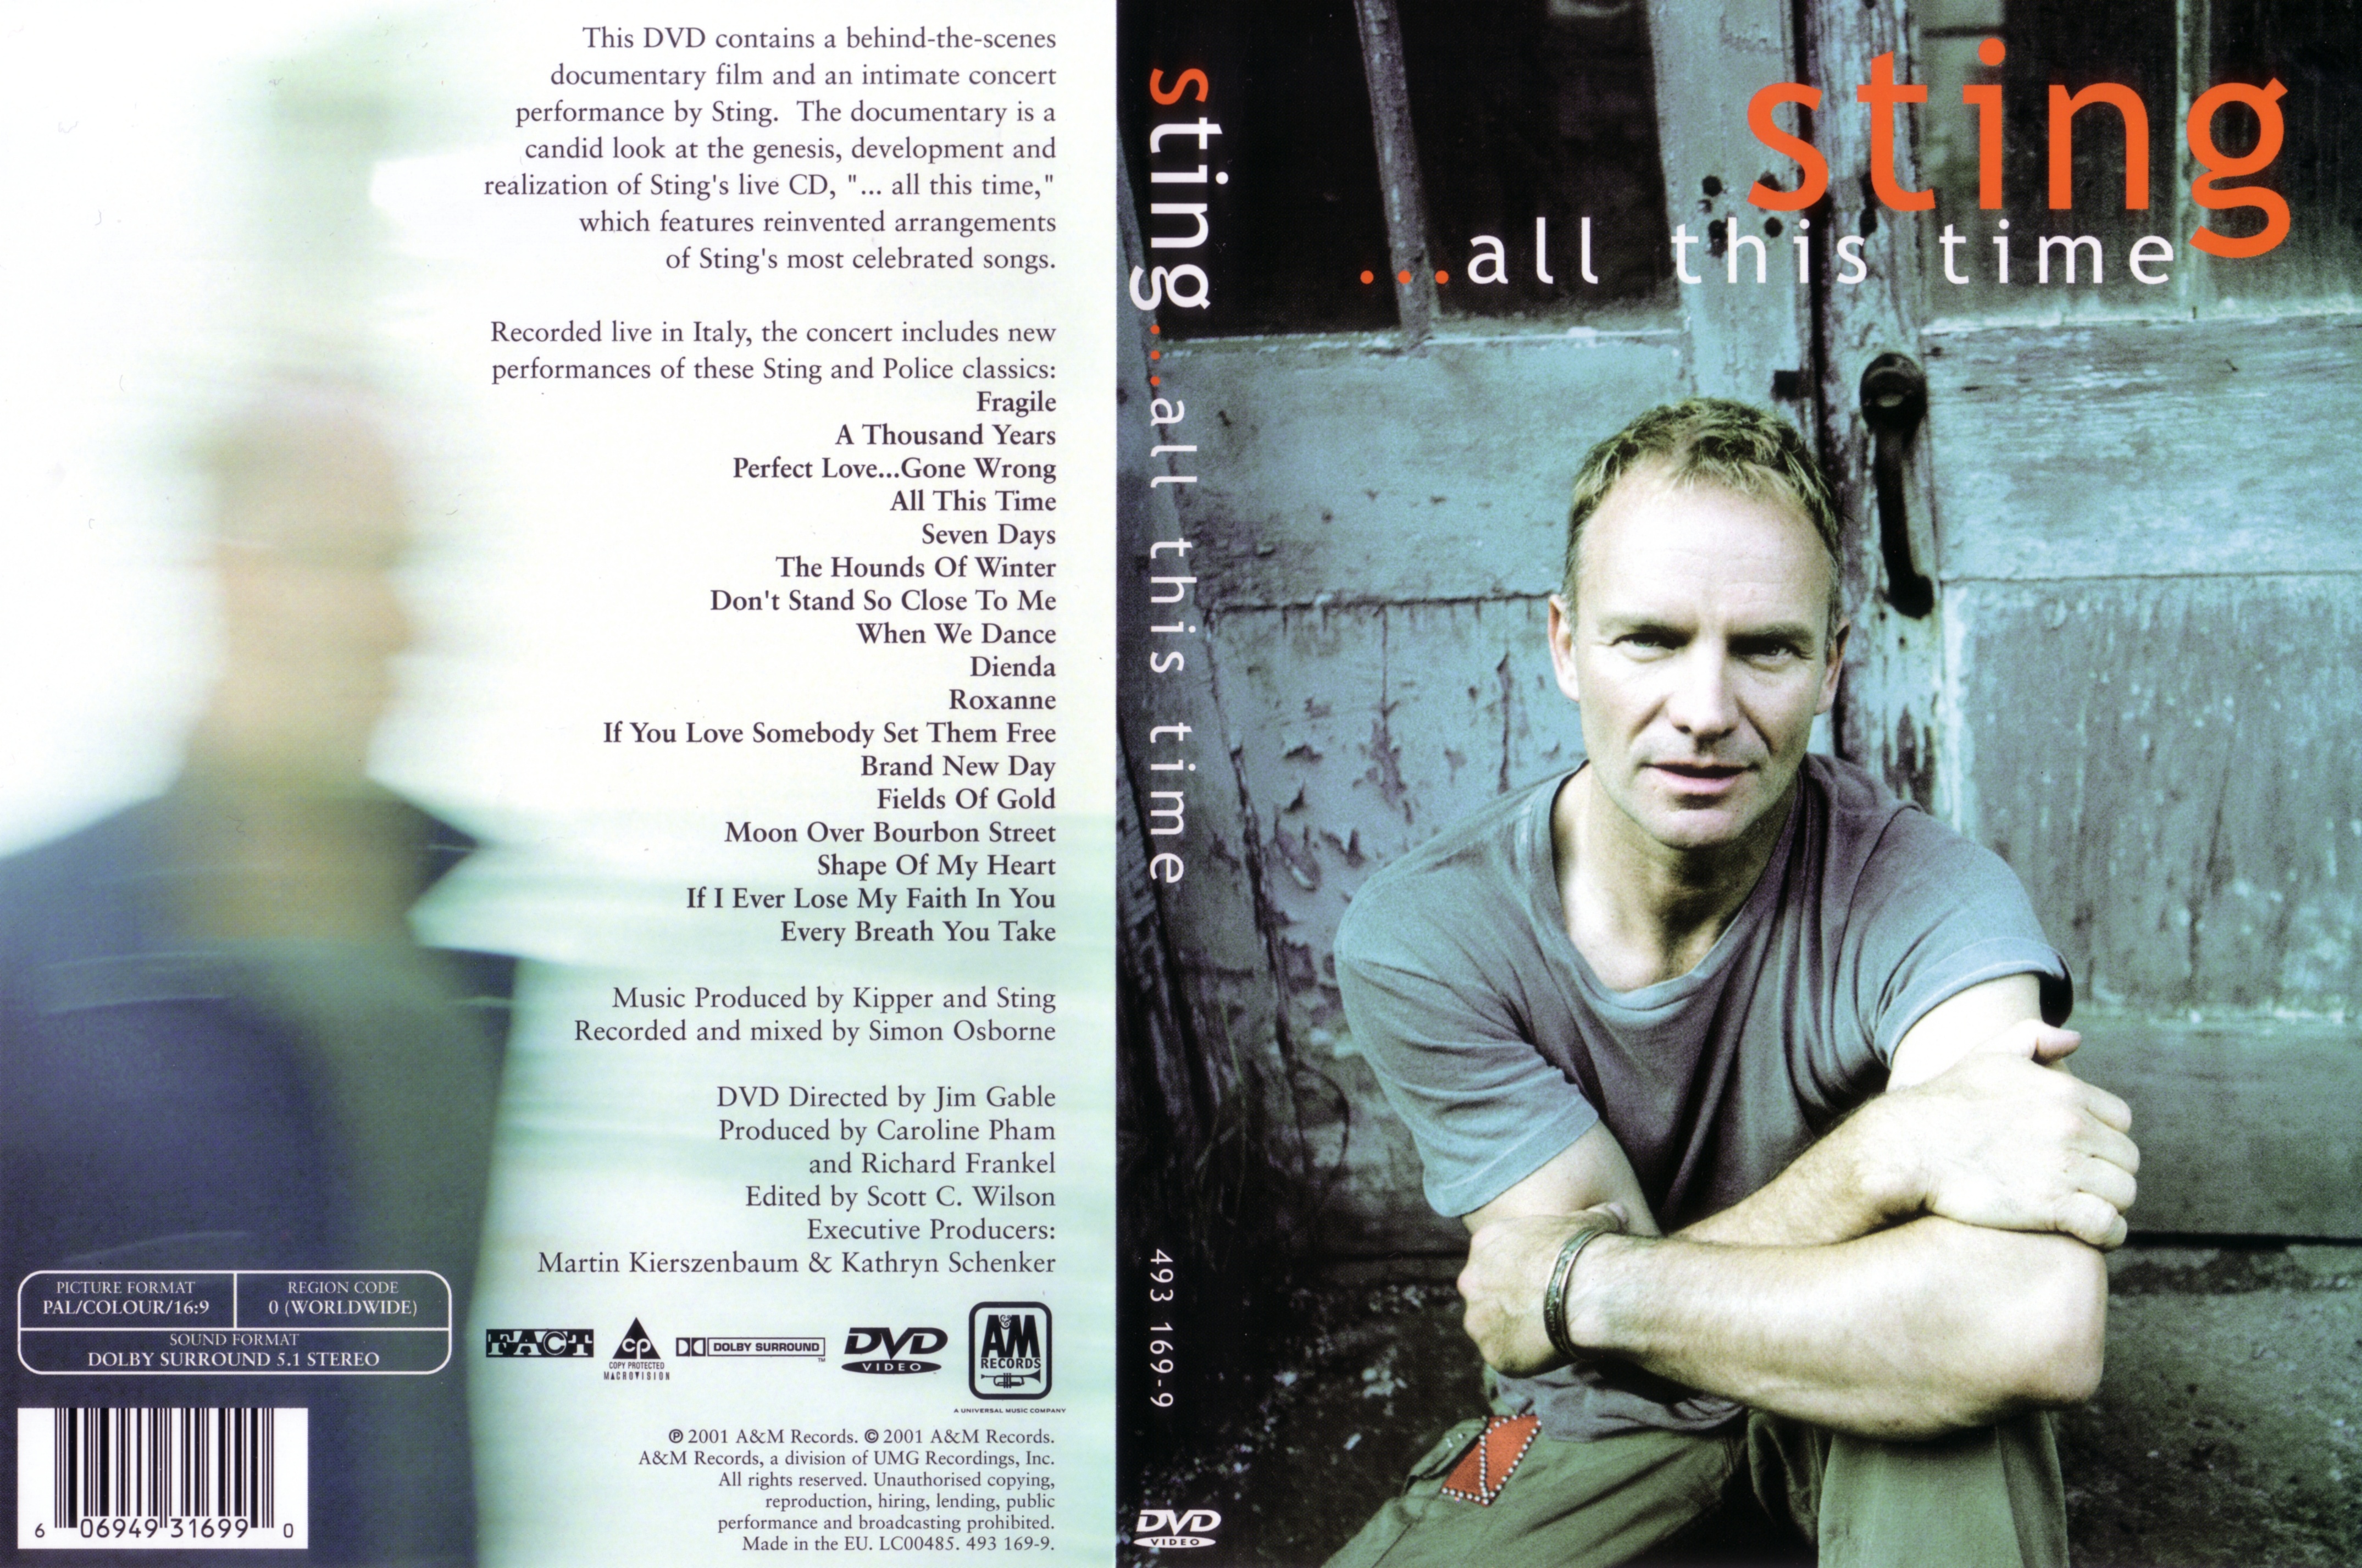 Jaquette DVD Sting - All this time